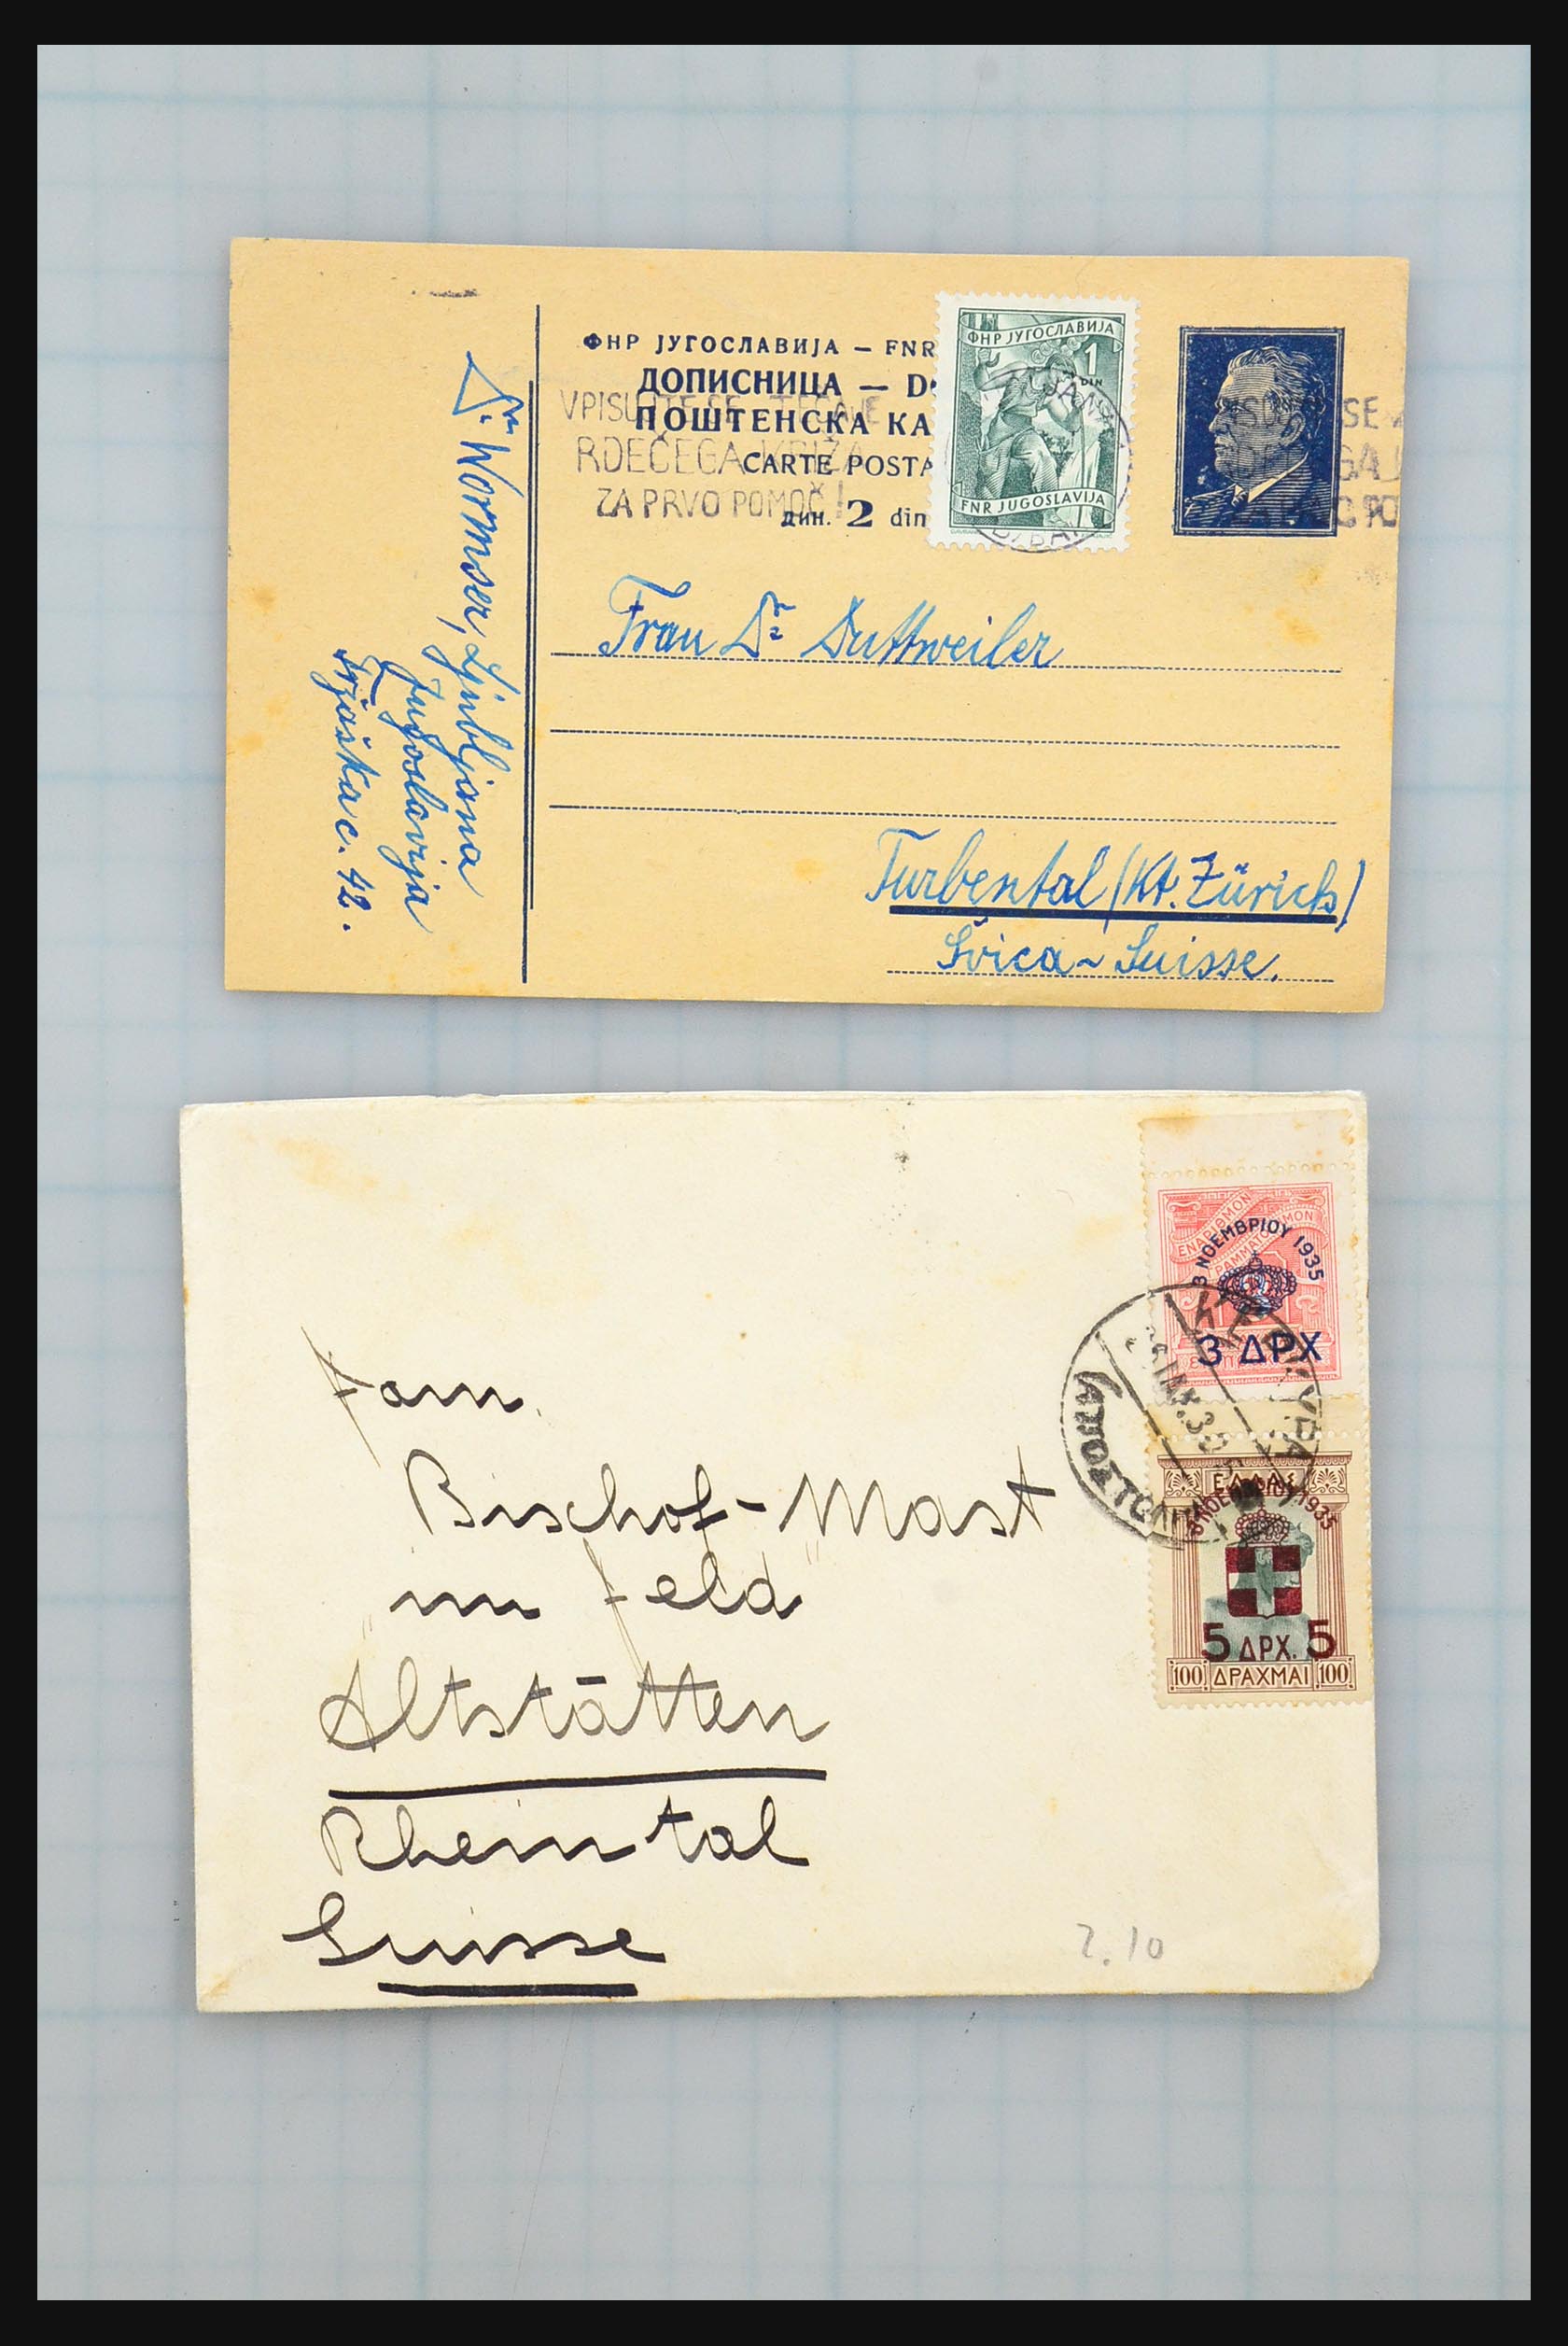 31358 021 - 31358 Portugal/Luxemburg/Greece covers 1880-1960.